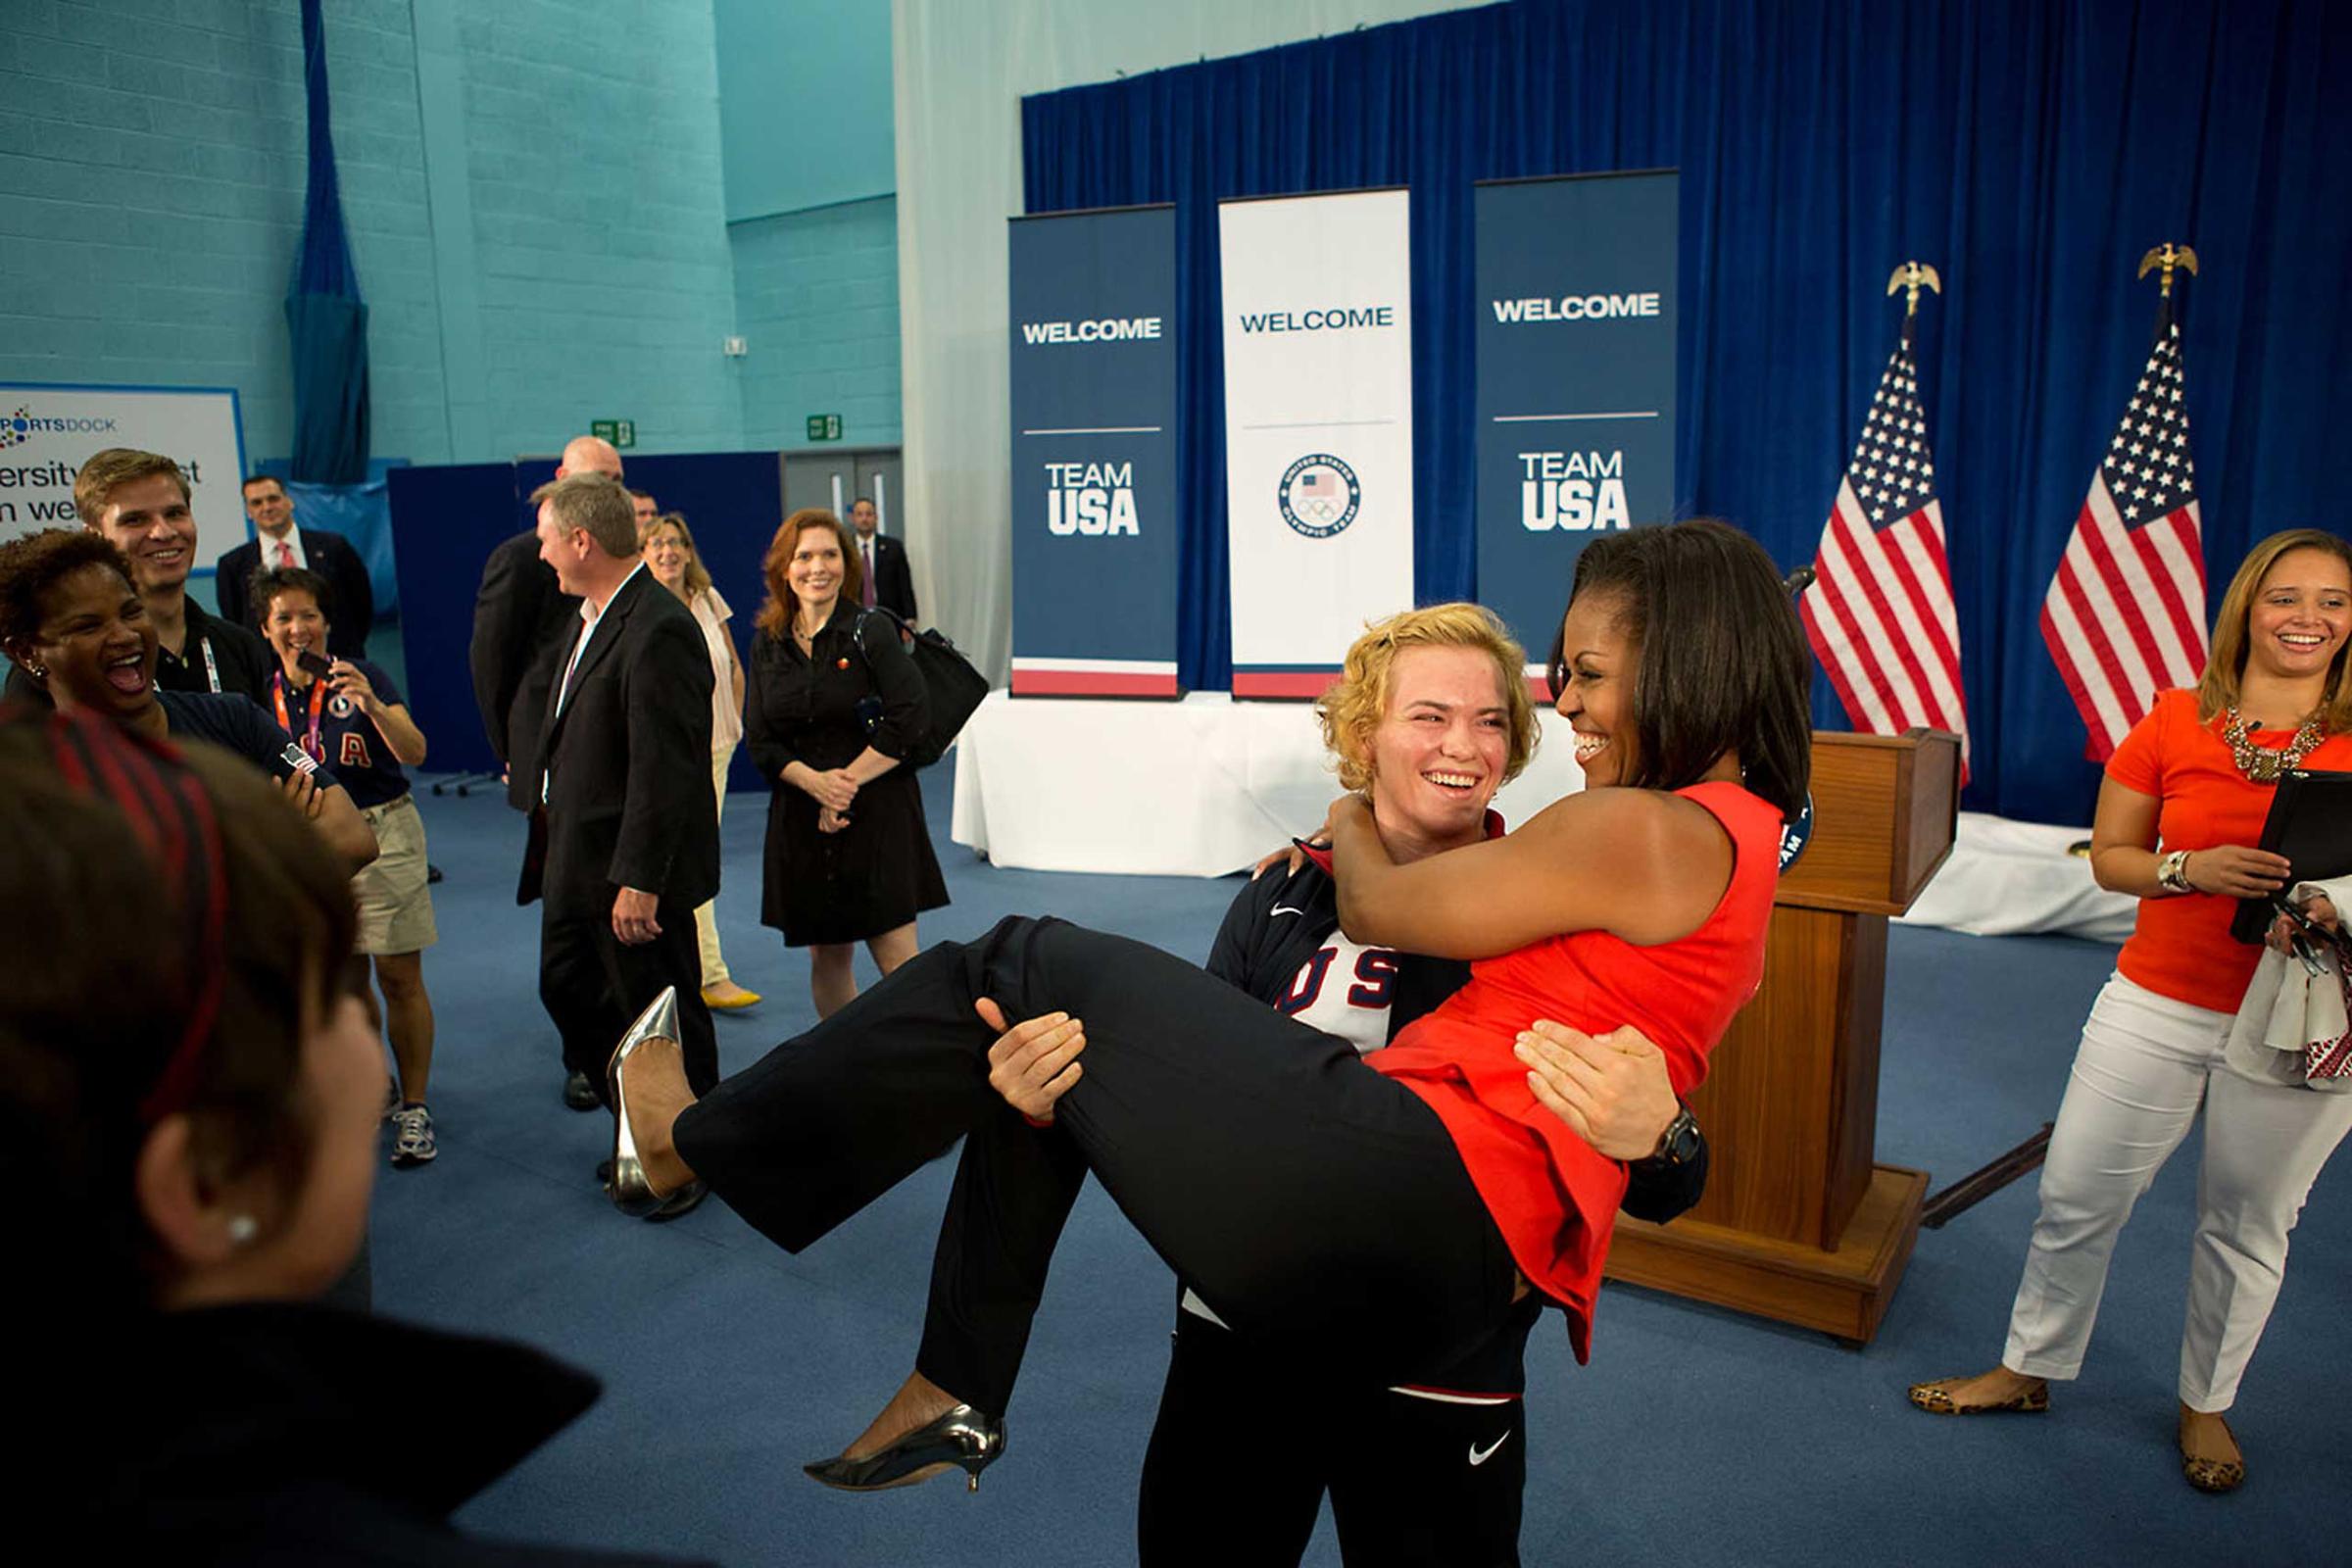 U.S. Olympic wrestler Elena Pirozhkova picks up the First Lady during a greet with Team USA Olympic athletes competing in the 2012 Summer Olympic Games, at the U.S. Olympic Training Facility at the University of East London in London, England, July 27, 2012.